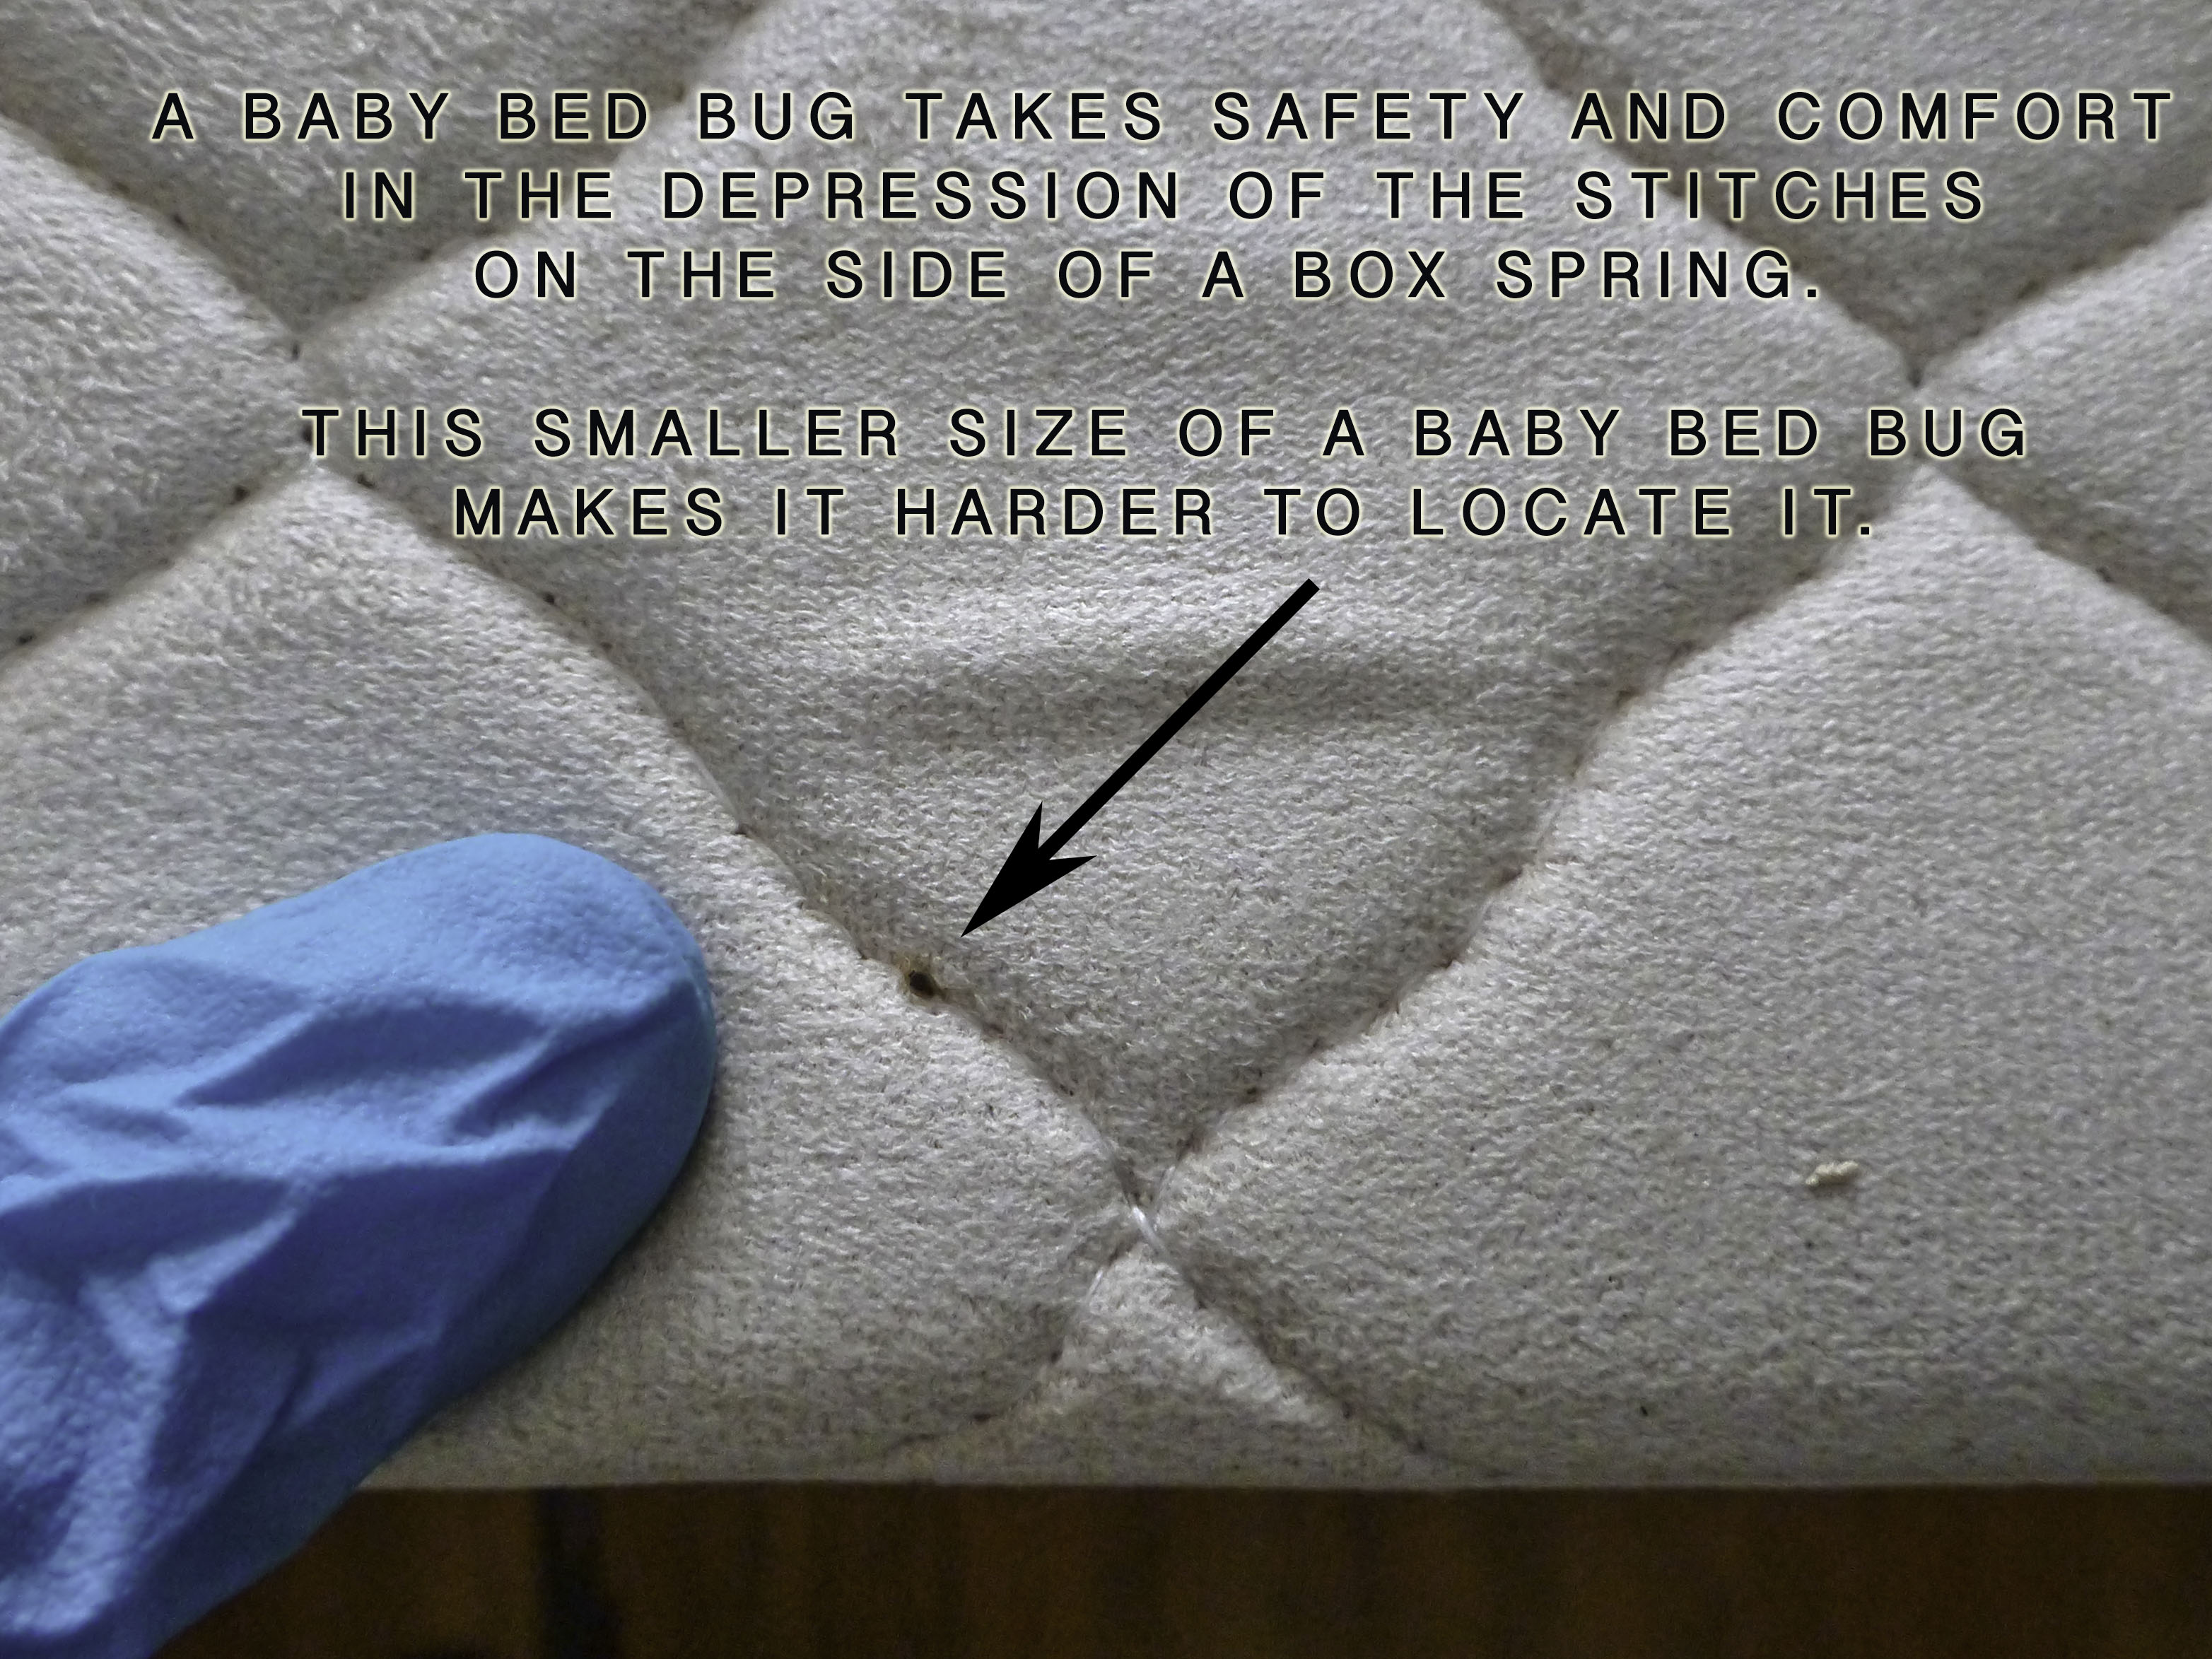 Baby bed bug FEELS SAFE IN the stitching depressions